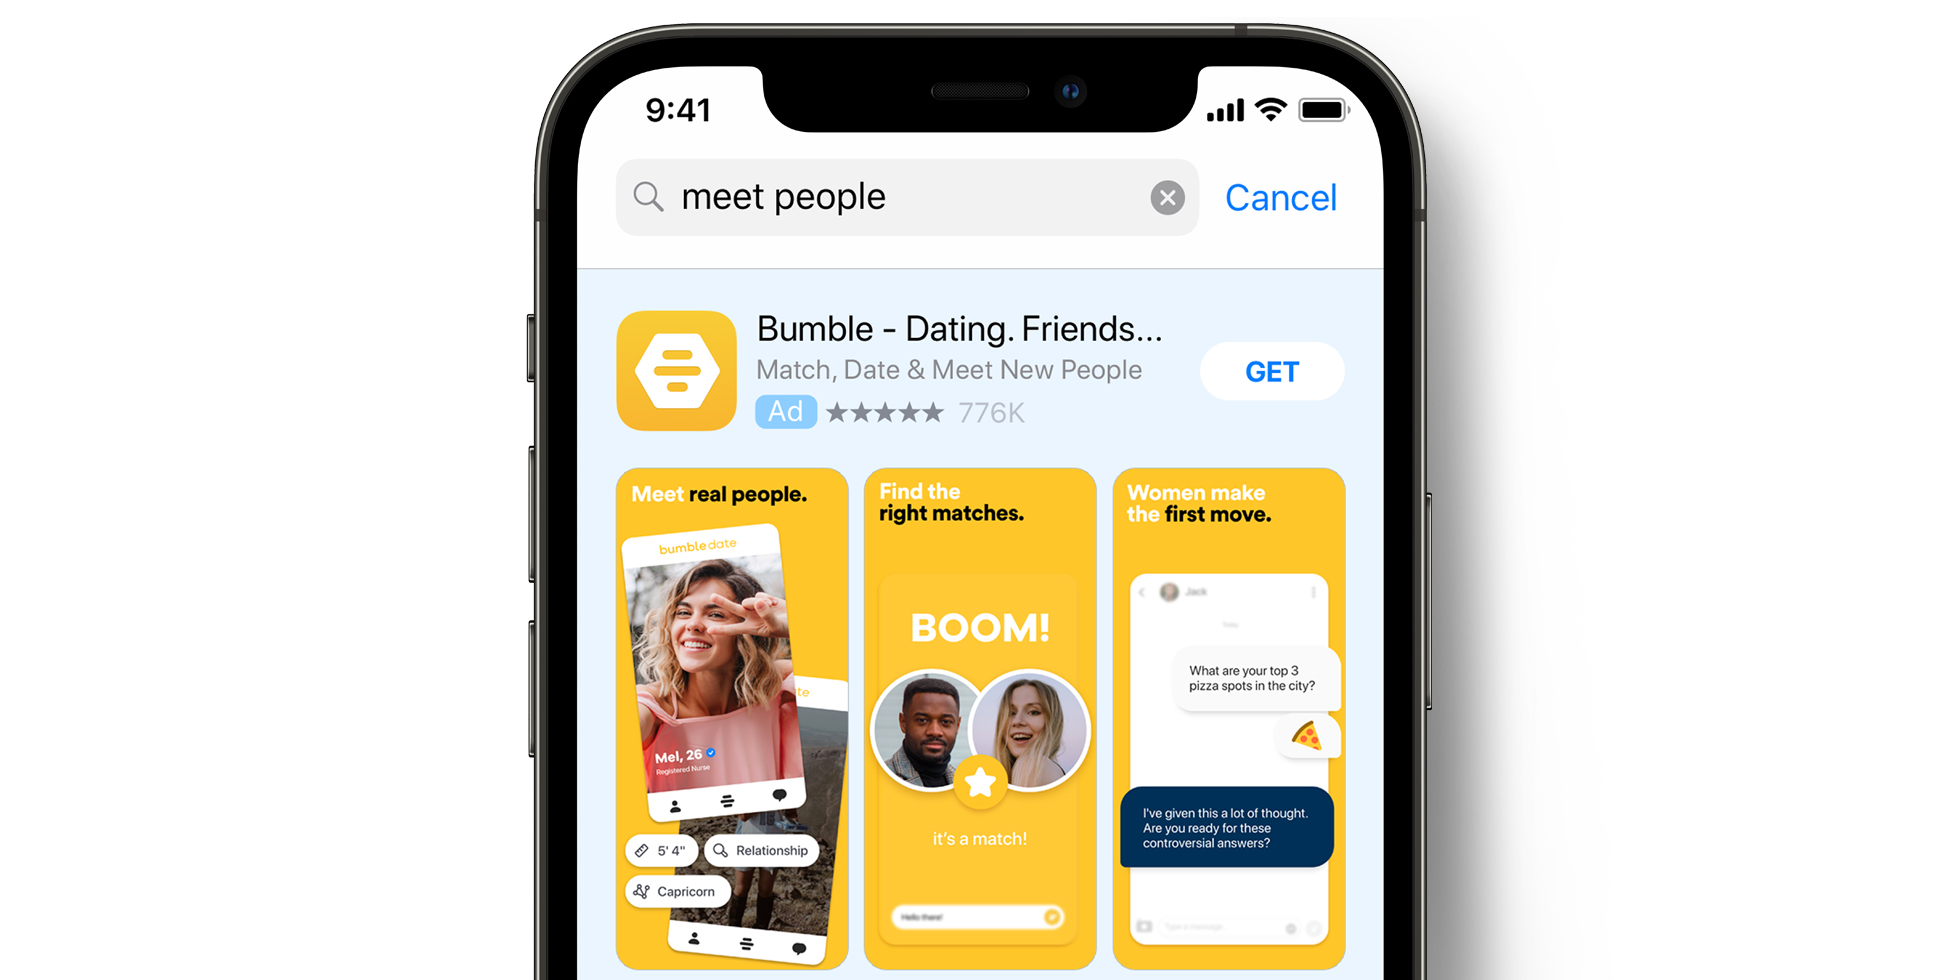 Bumble ad on the App Store